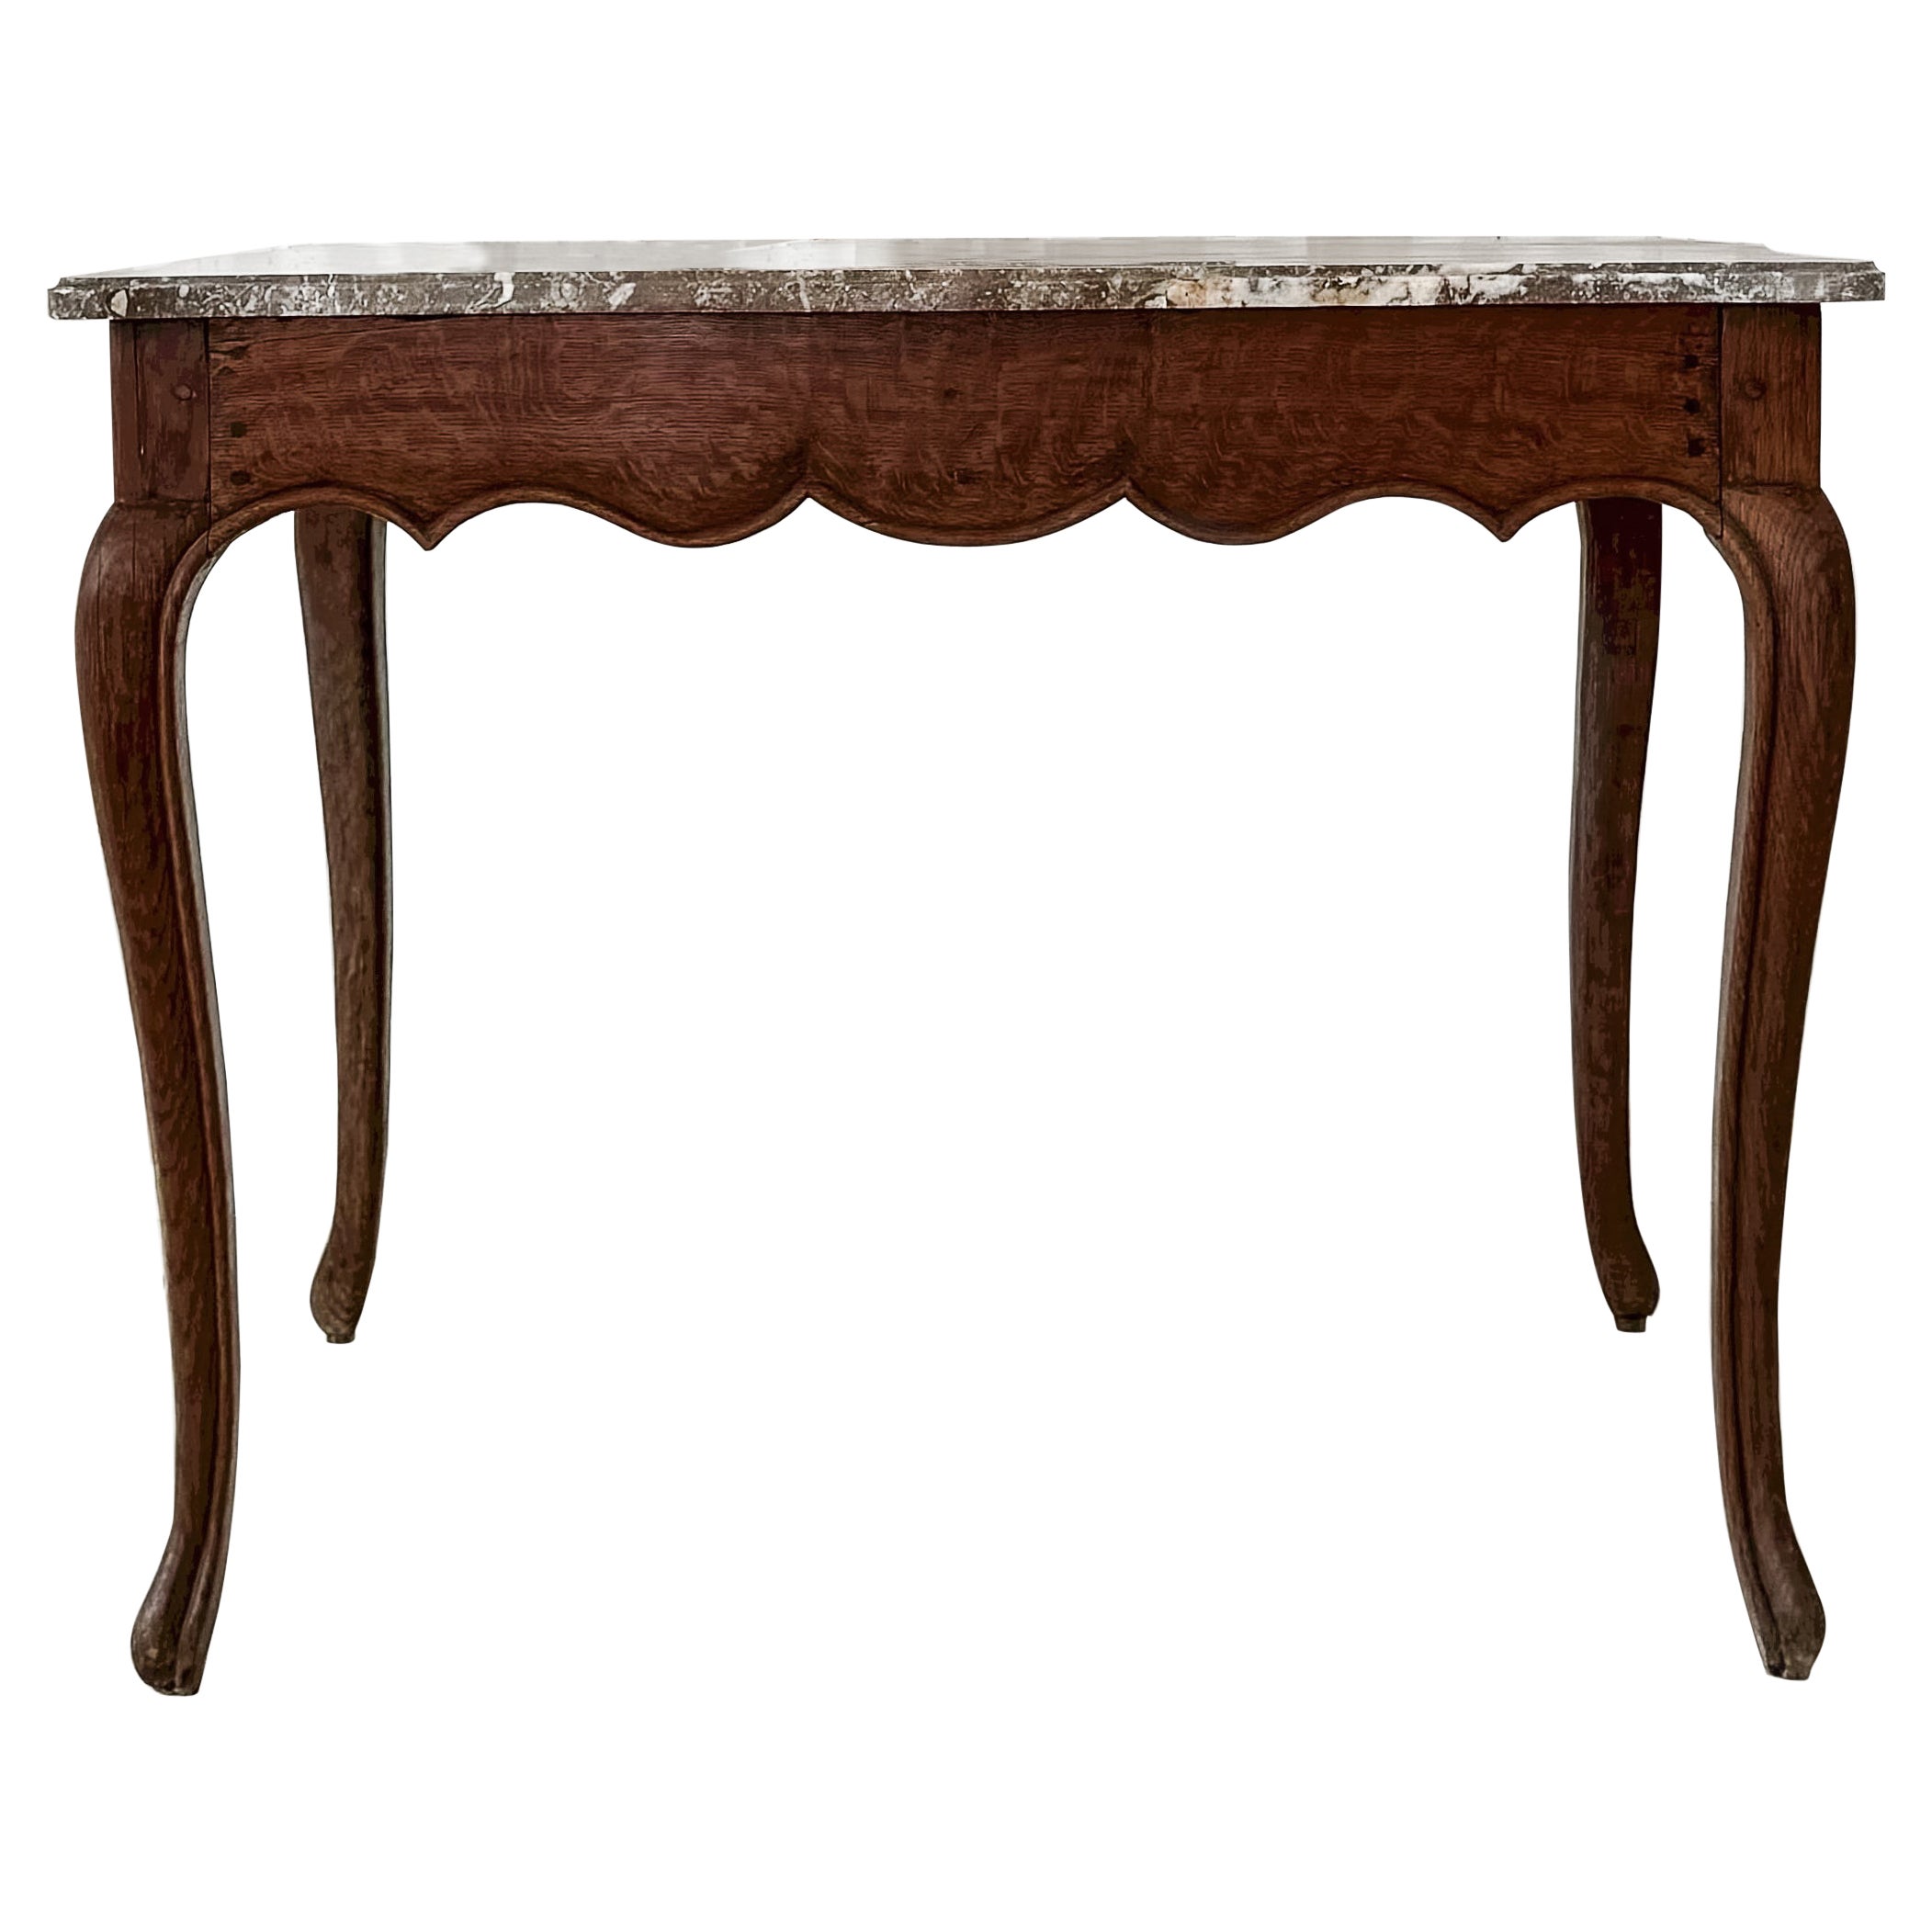 19th Century French Cabriole Leg Accent Table with Marble Top For Sale